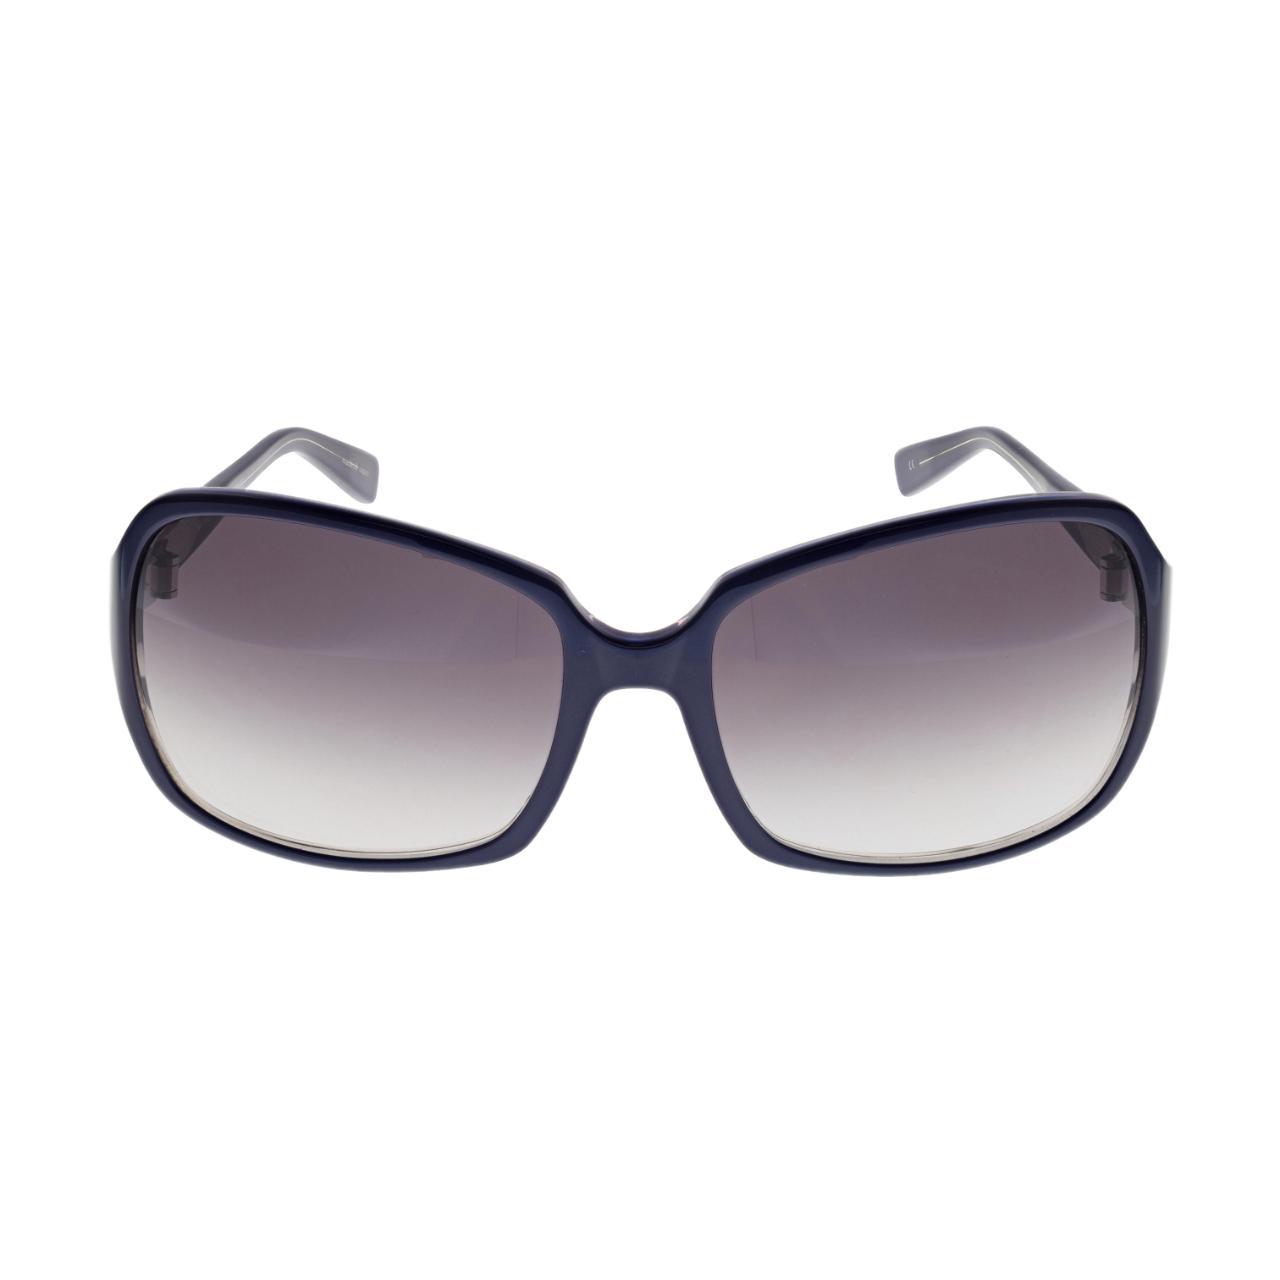 Oliver Peoples Women's Blue and Grey Sunglasses (2)